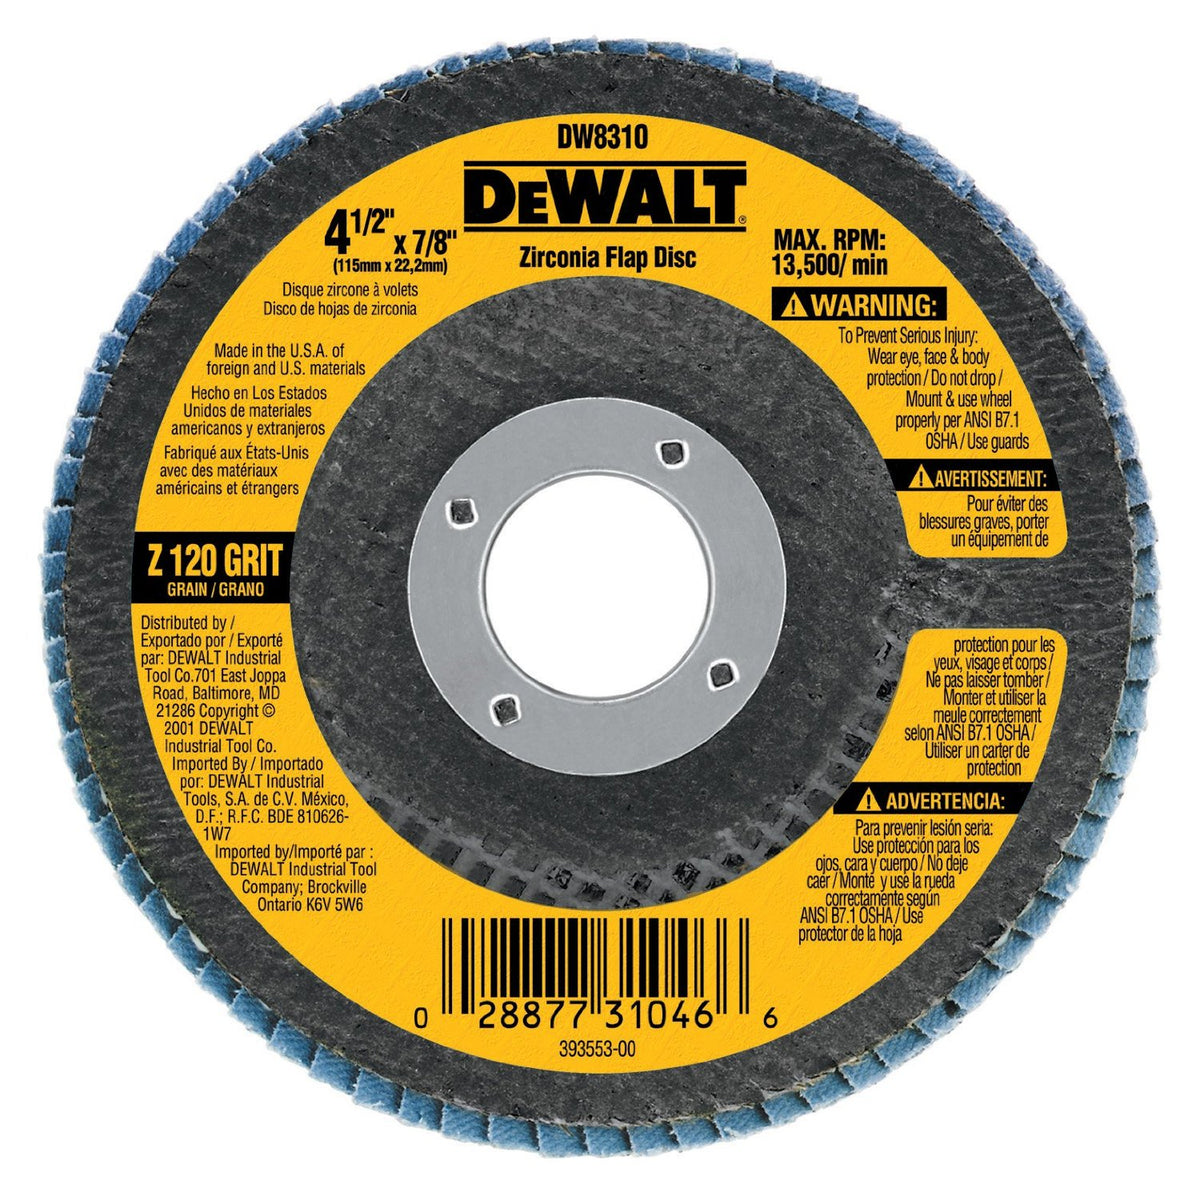 buy abrasive wheels at cheap rate in bulk. wholesale & retail heavy duty hand tools store. home décor ideas, maintenance, repair replacement parts